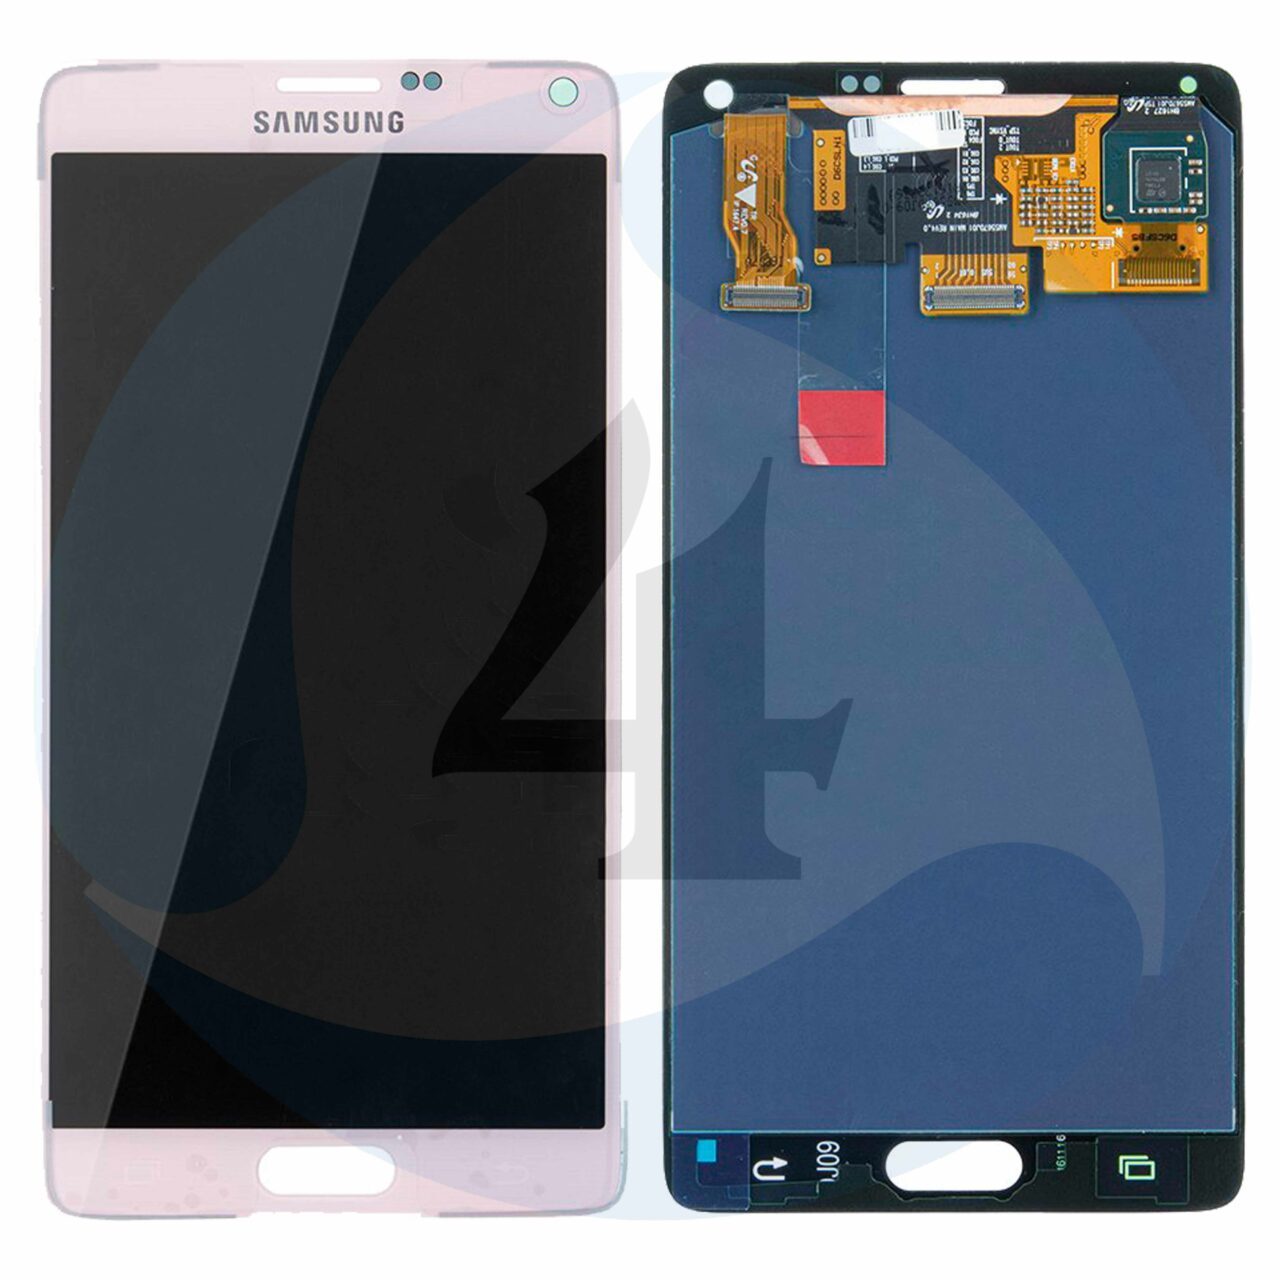 Eng pl LCD Touch Pad Complete Samsung N910 Galaxy Note 4 Pink Gh97 16565 D Original S Ervice Pack 81074 1 GH97 16565 D